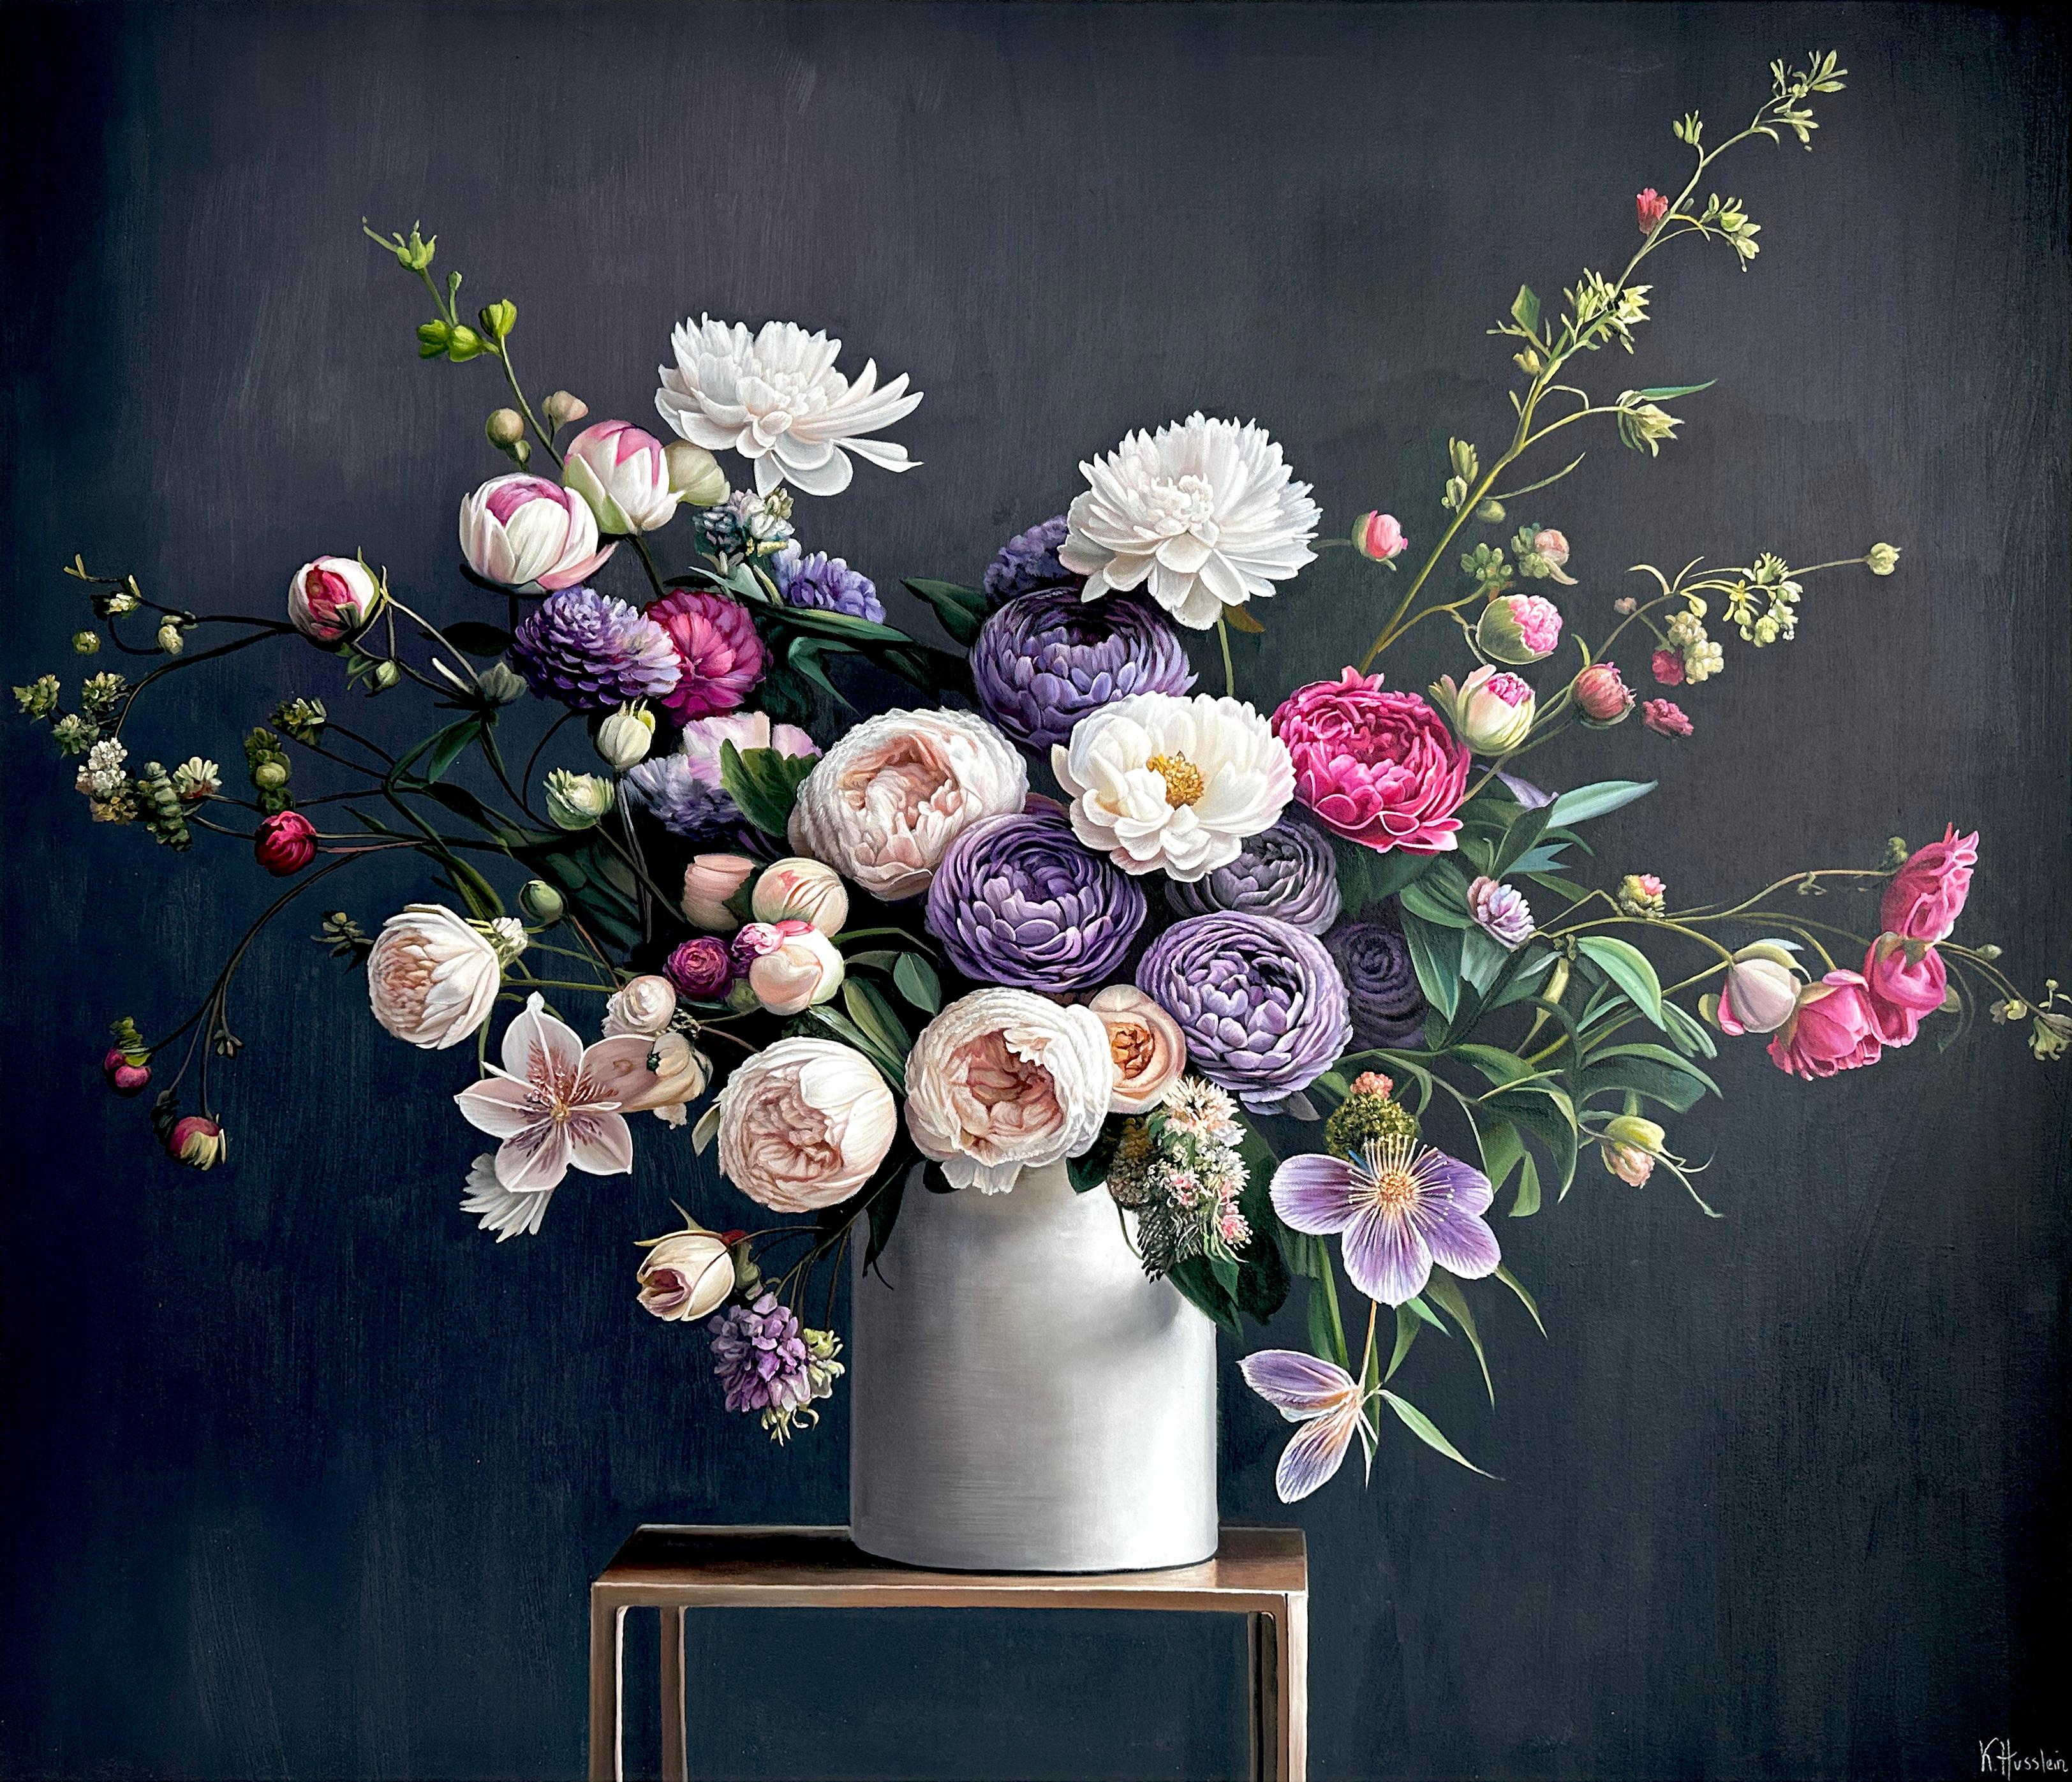 Katharina Husslein Landscape Painting - And Round Our Souls Entwine by K Husslein Botanical Hyperrealistic Still life 